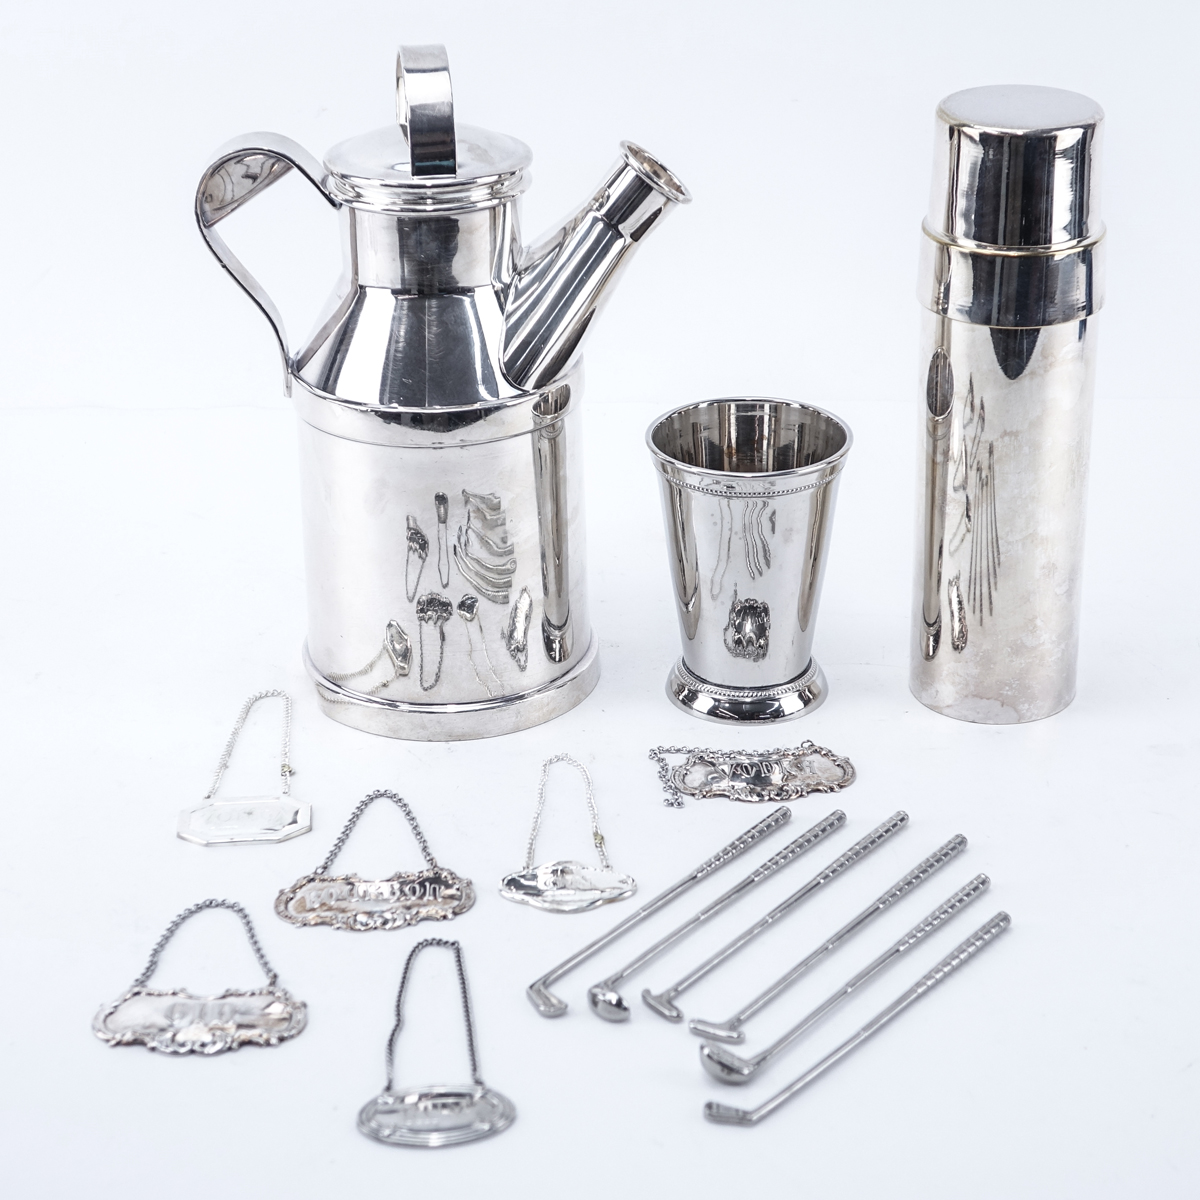 Grouping Of Silver Plate Bar Accessories. Includes: Reed & Barton shaker/decanter, Towle shaker, Towle tumbler, 6 golf club motif stirrers, 6 decanter labels.